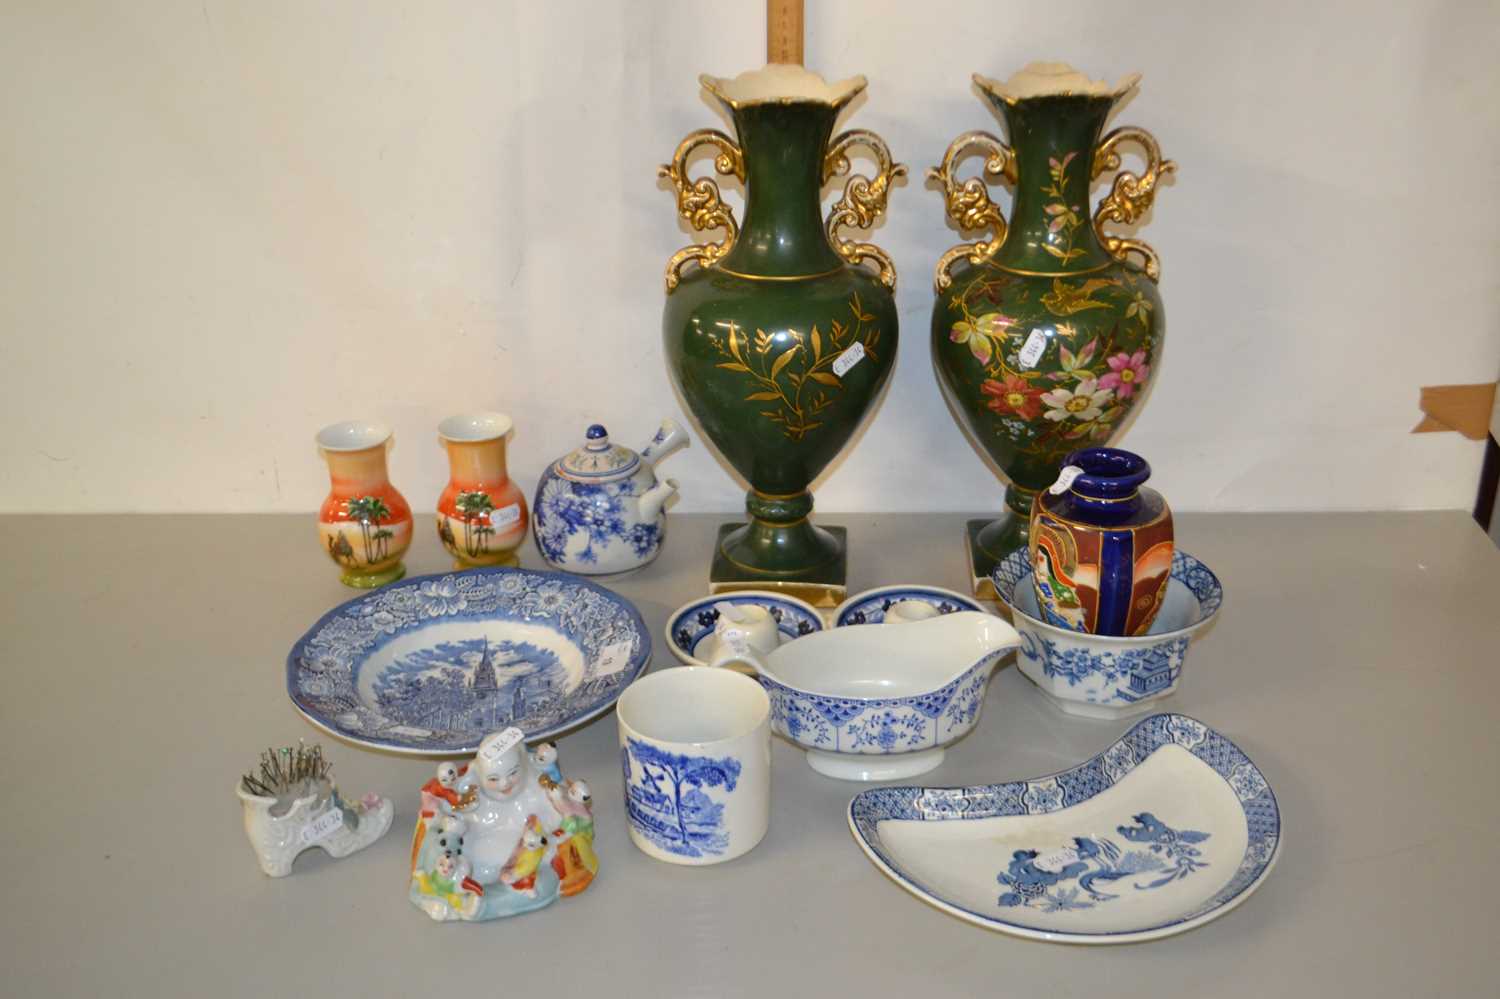 Mixed Lot: Pair of large green vases, various other smaller vases, blue and white ceramics etc